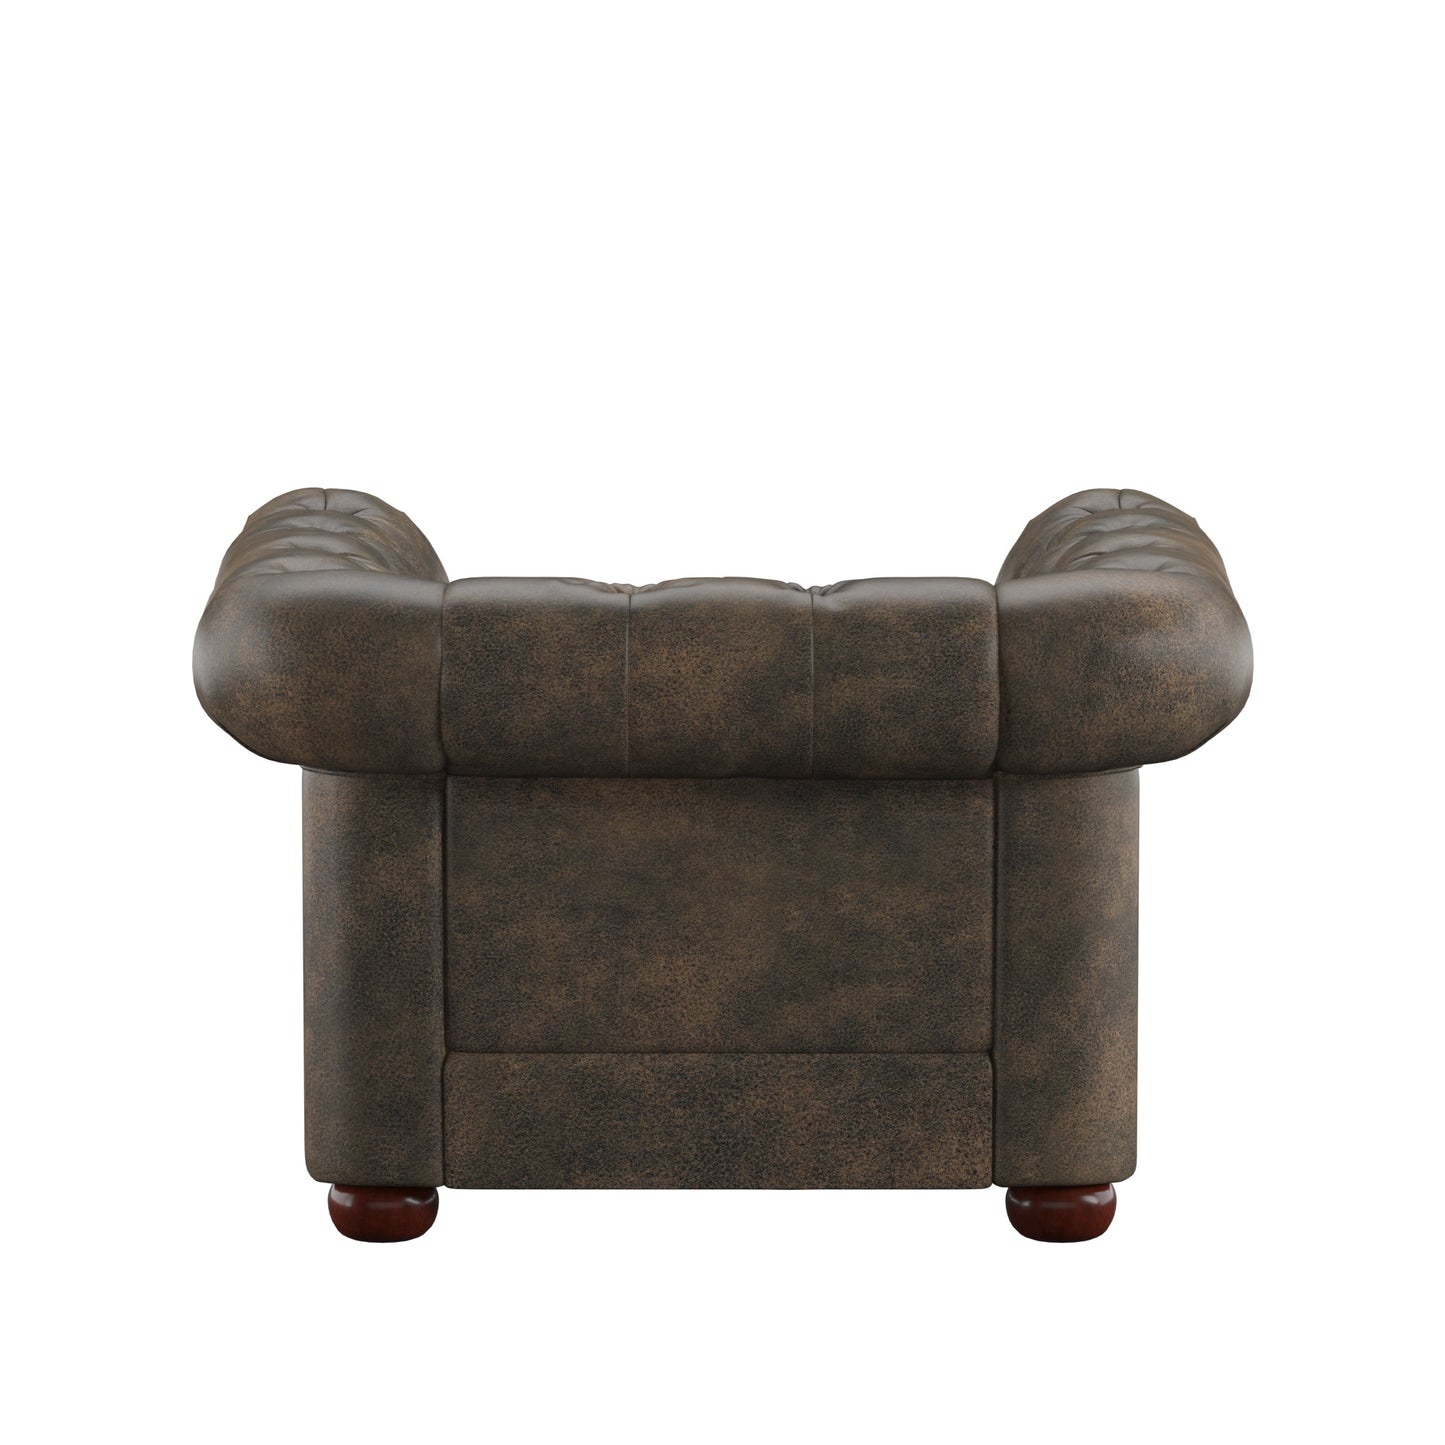 Tufted Scroll Arm Chesterfield Chair - Brown Polished Microfiber